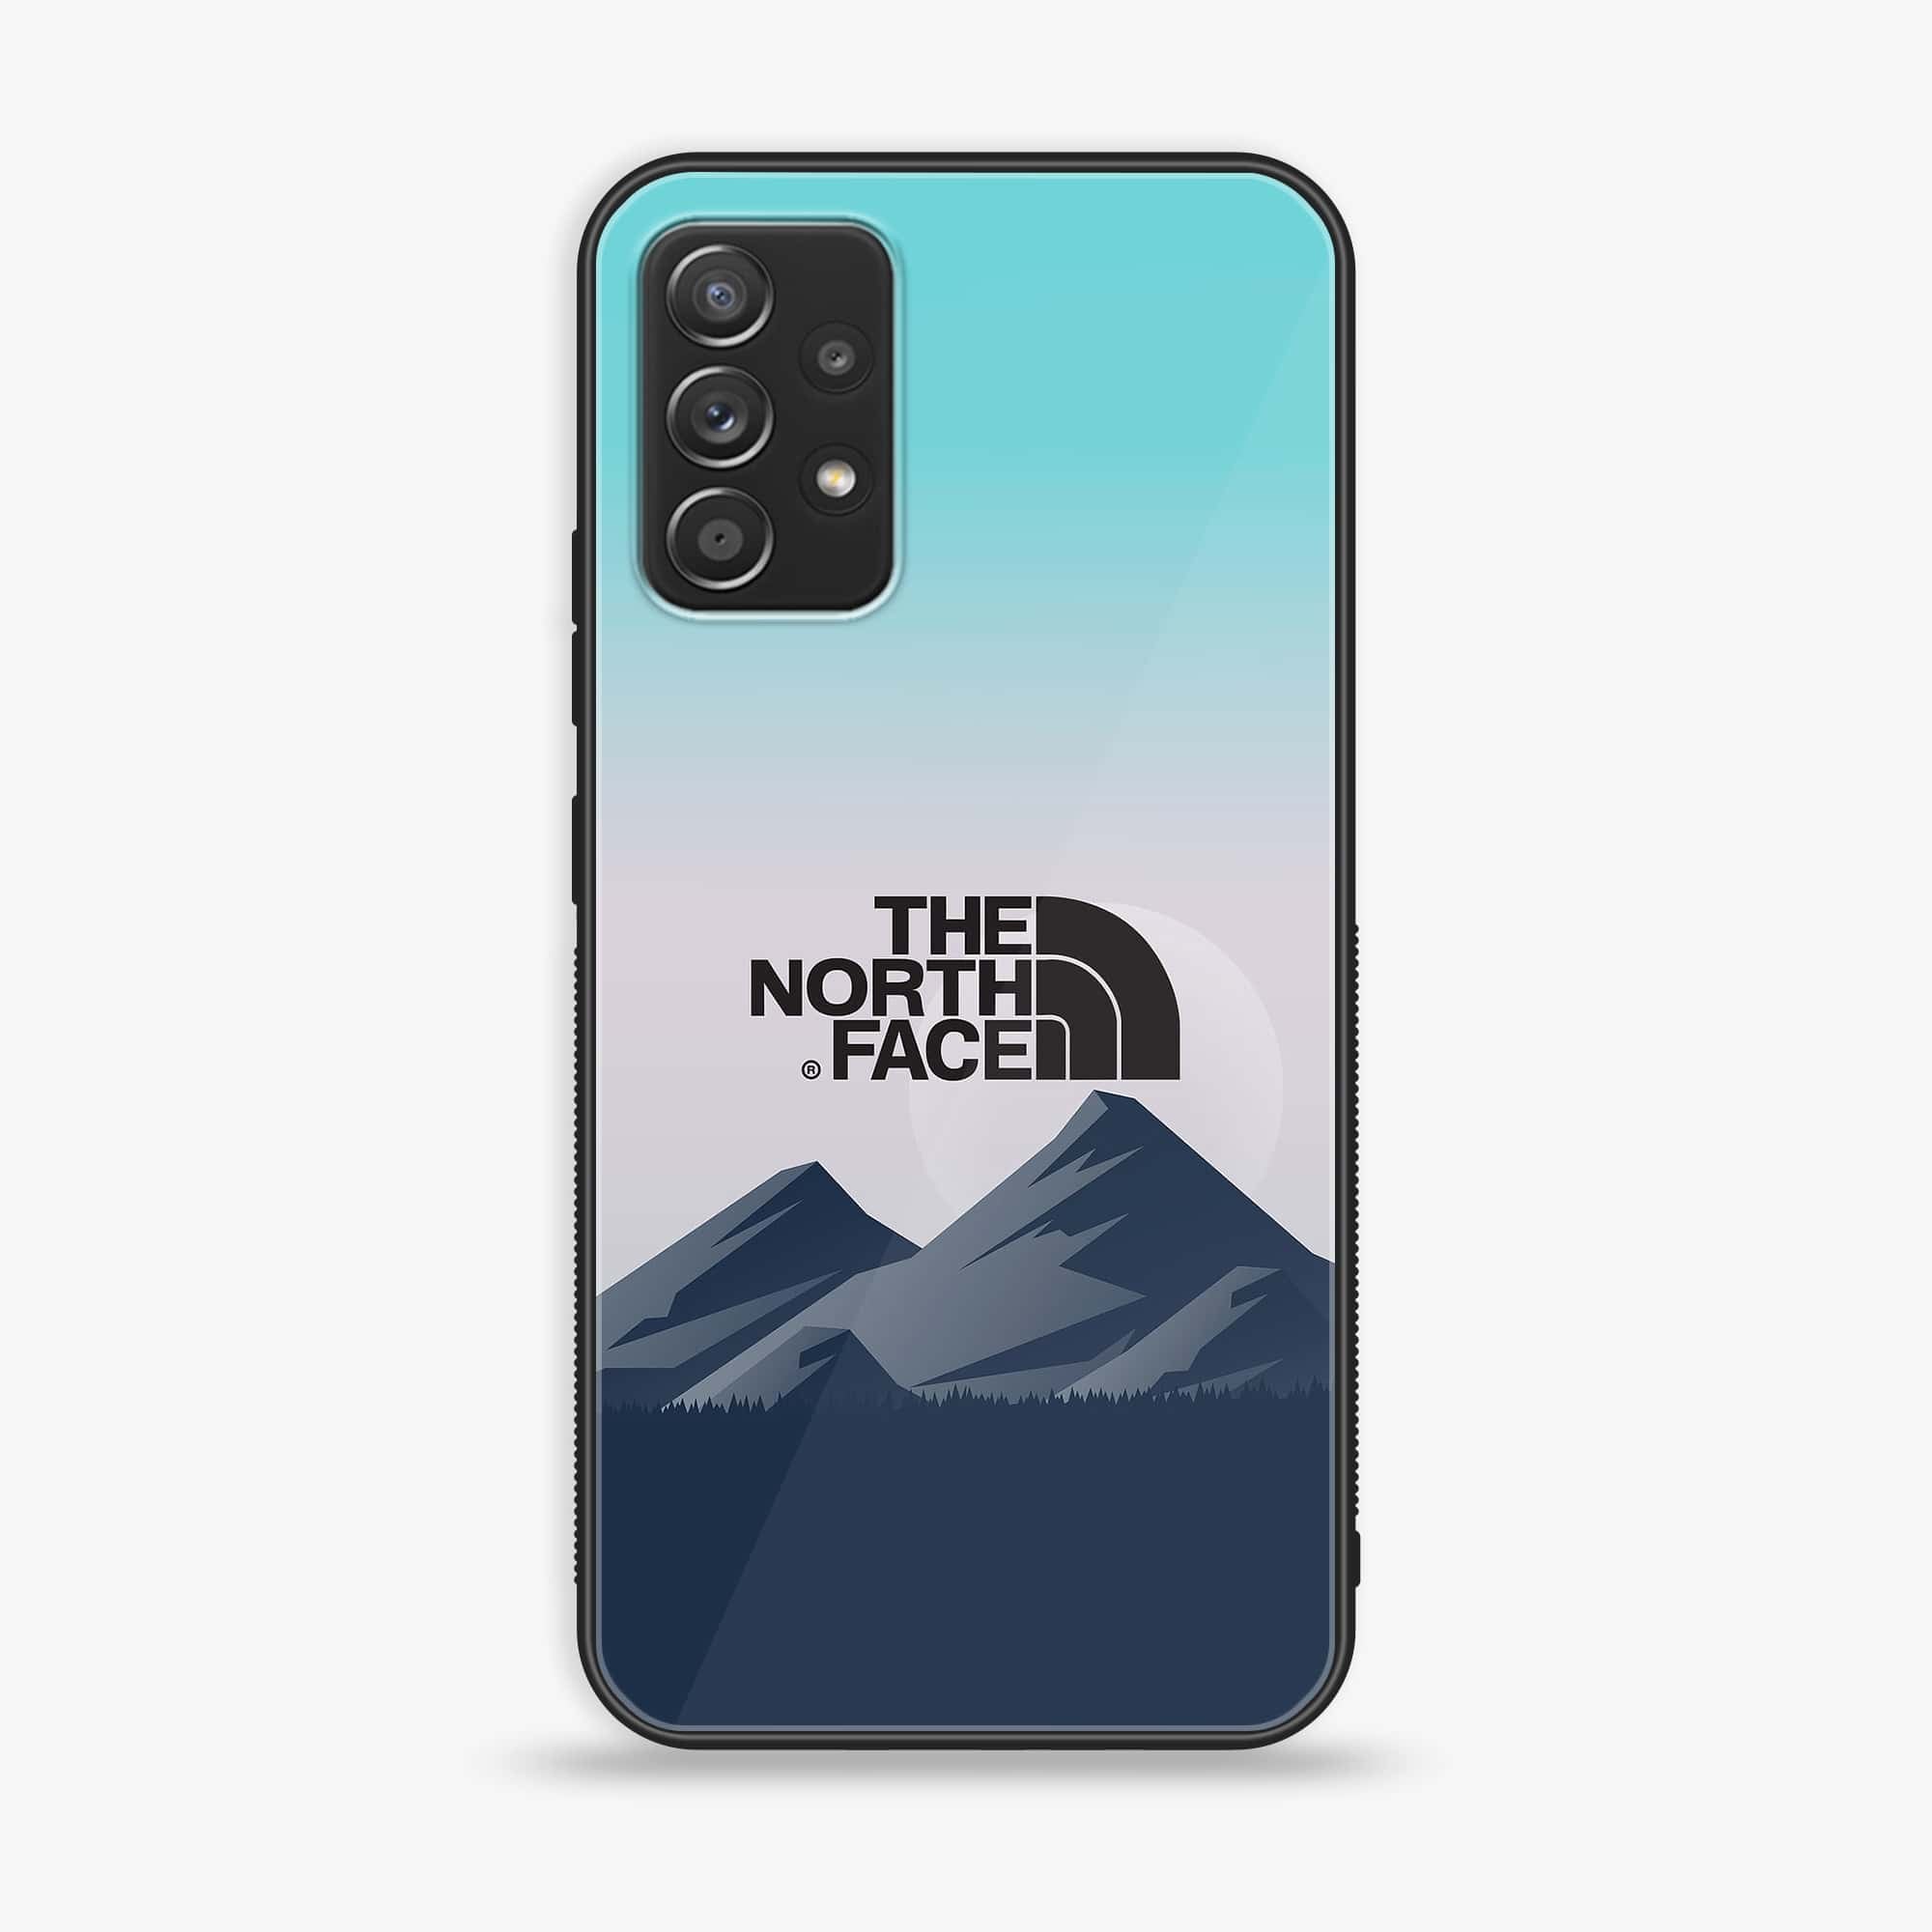 Samsung Galaxy A52 - The North Face Series - Premium Printed Glass soft Bumper shock Proof Case